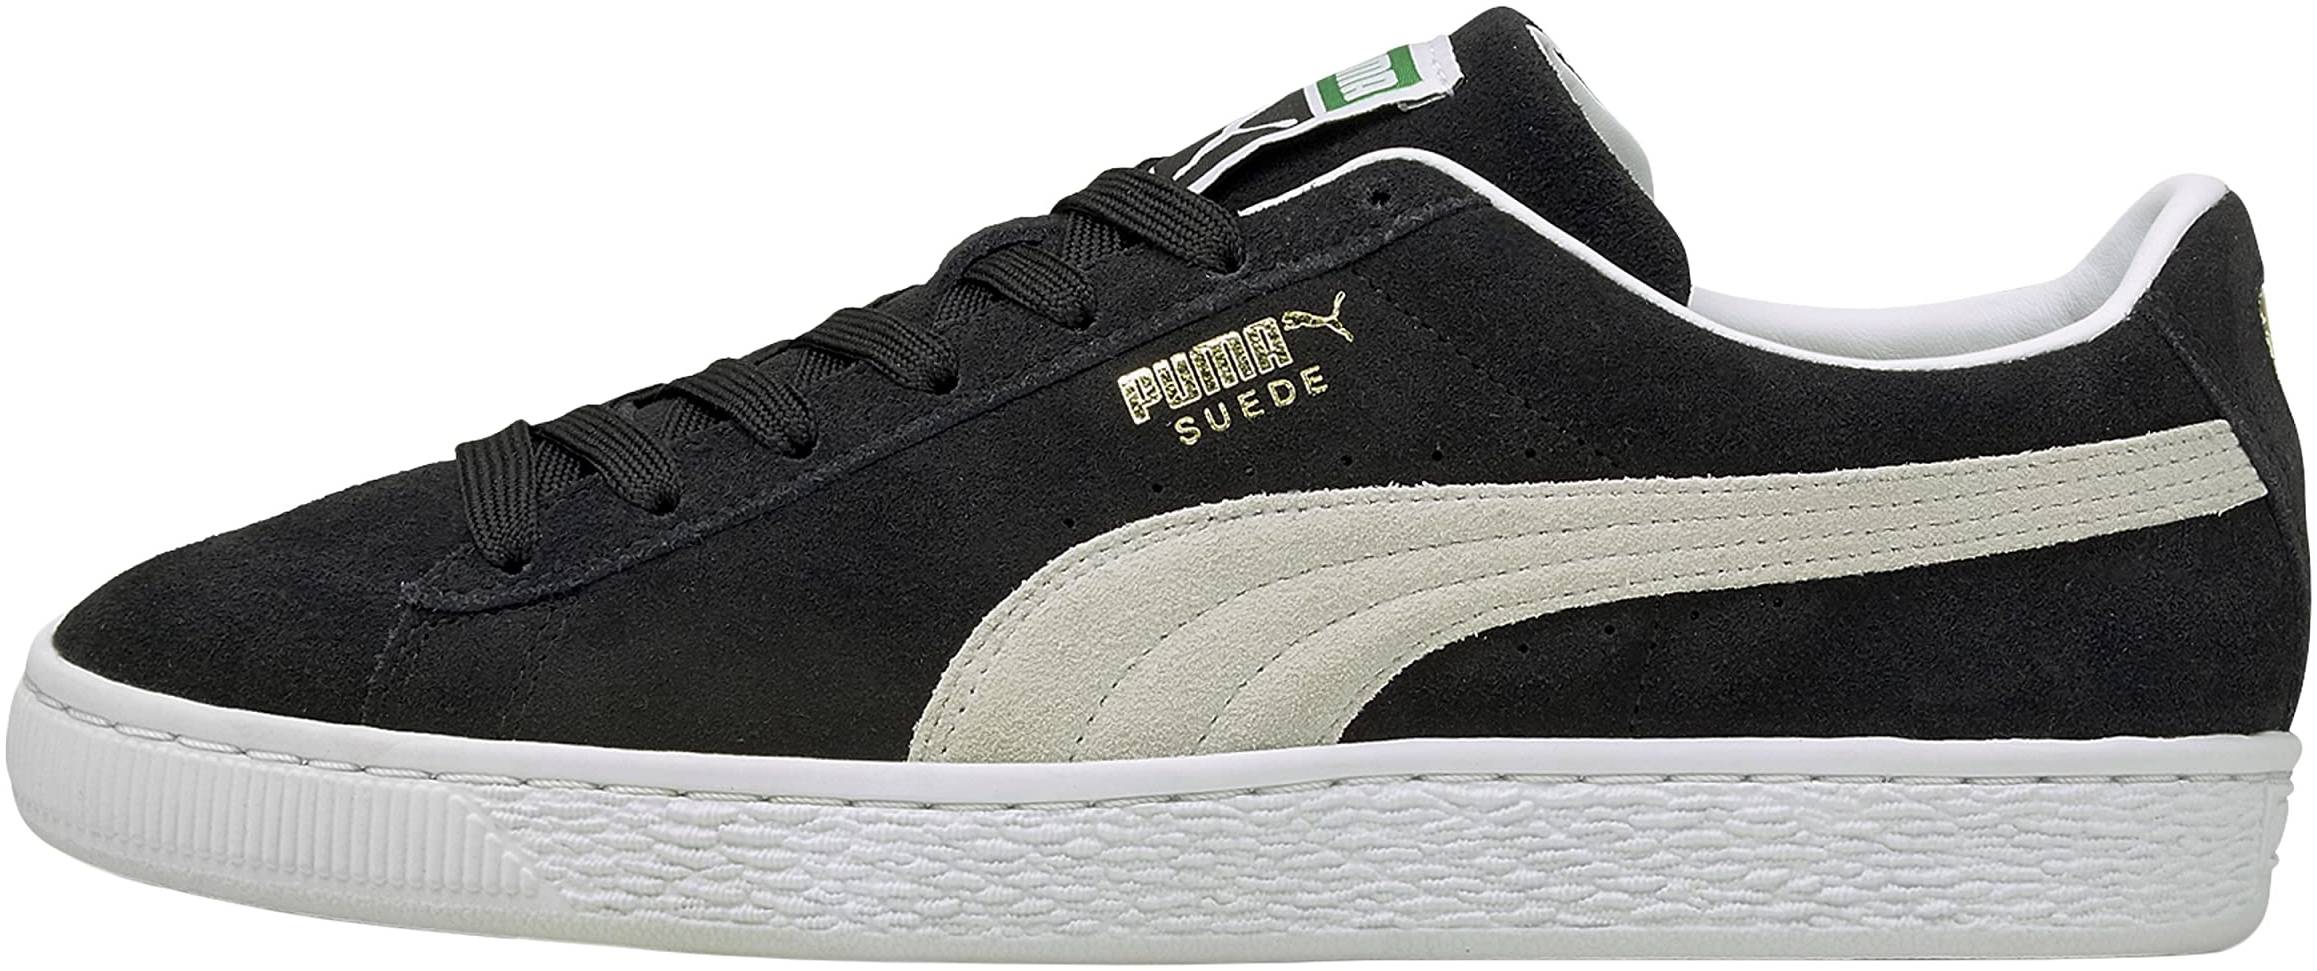 Suede Classic XXI Men's Sneakers PUMA | vlr.eng.br